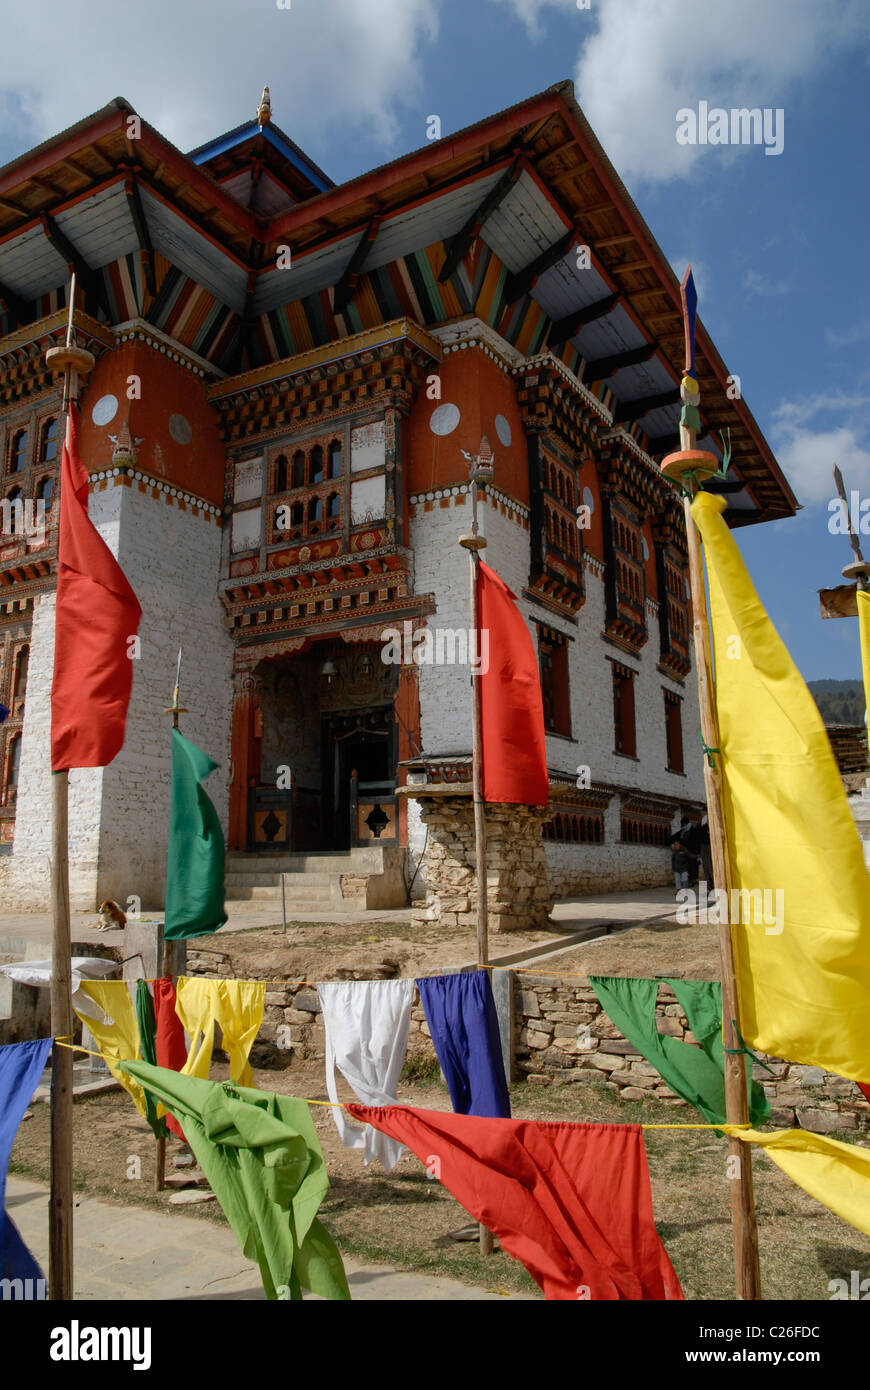 Entrance of the monastery in Ura, central Bhutan, prepared for a special visitor Stock Photo